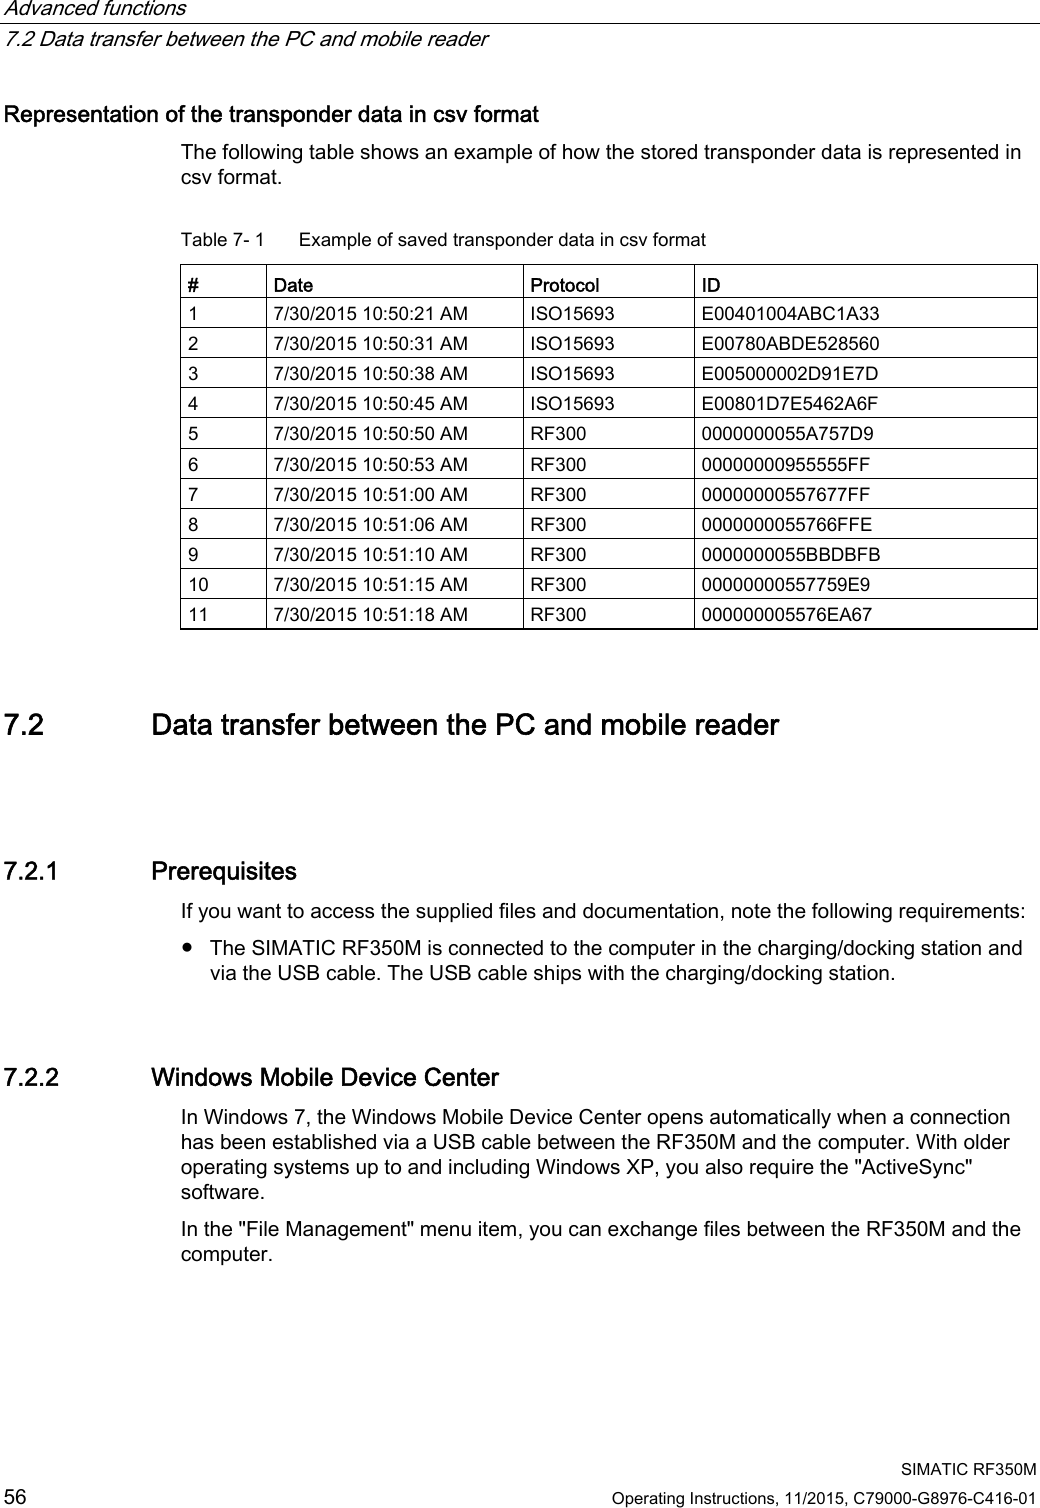 Advanced functions   7.2 Data transfer between the PC and mobile reader  SIMATIC RF350M 56 Operating Instructions, 11/2015, C79000-G8976-C416-01 Representation of the transponder data in csv format The following table shows an example of how the stored transponder data is represented in csv format. Table 7- 1  Example of saved transponder data in csv format  #  Date  Protocol  ID 1  7/30/2015 10:50:21 AM  ISO15693  E00401004ABC1A33 2  7/30/2015 10:50:31 AM  ISO15693  E00780ABDE528560 3  7/30/2015 10:50:38 AM  ISO15693  E005000002D91E7D 4  7/30/2015 10:50:45 AM  ISO15693  E00801D7E5462A6F 5  7/30/2015 10:50:50 AM  RF300  0000000055A757D9 6  7/30/2015 10:50:53 AM  RF300  00000000955555FF 7  7/30/2015 10:51:00 AM  RF300  00000000557677FF 8  7/30/2015 10:51:06 AM  RF300  0000000055766FFE 9  7/30/2015 10:51:10 AM  RF300  0000000055BBDBFB 10  7/30/2015 10:51:15 AM  RF300  00000000557759E9 11  7/30/2015 10:51:18 AM  RF300  000000005576EA67 7.2 Data transfer between the PC and mobile reader  7.2.1 Prerequisites If you want to access the supplied files and documentation, note the following requirements:  ● The SIMATIC RF350M is connected to the computer in the charging/docking station and via the USB cable. The USB cable ships with the charging/docking station. 7.2.2 Windows Mobile Device Center In Windows 7, the Windows Mobile Device Center opens automatically when a connection has been established via a USB cable between the RF350M and the computer. With older operating systems up to and including Windows XP, you also require the &quot;ActiveSync&quot; software. In the &quot;File Management&quot; menu item, you can exchange files between the RF350M and the computer. 